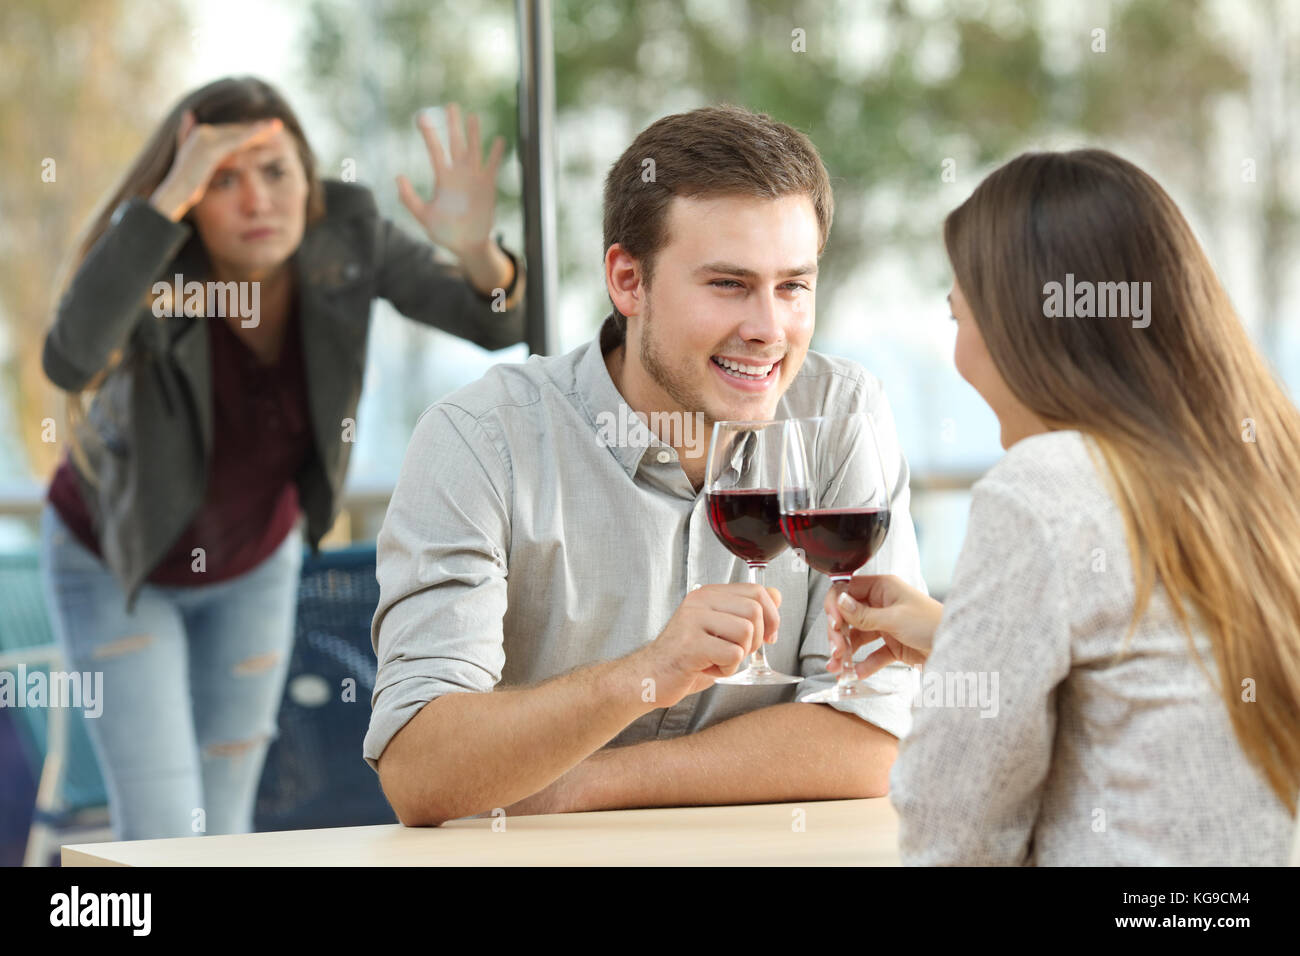 Obsessed ex girlfriend spying to a couple dating in a coffee shop Stock Photo